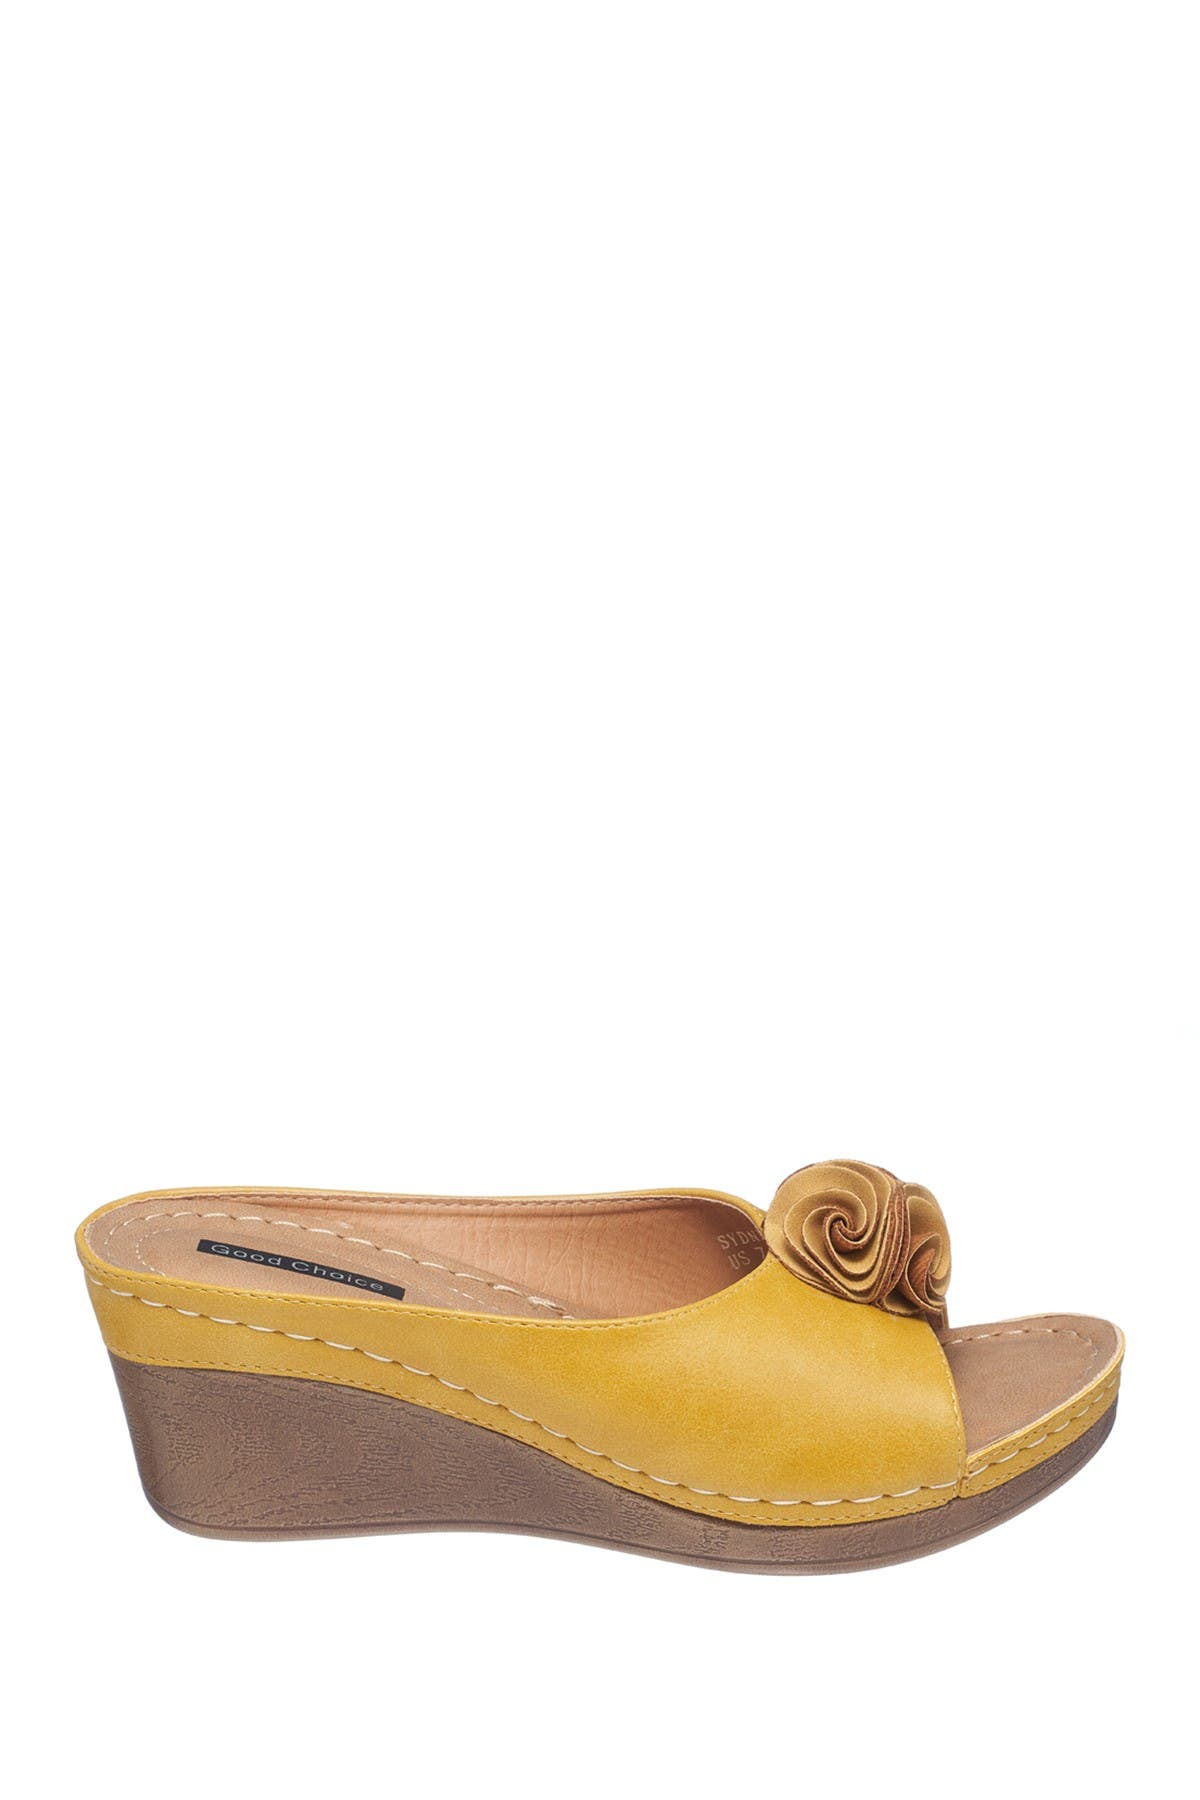 Gc Shoes Sydney Floral Platform Wedge Sandal In Yellow